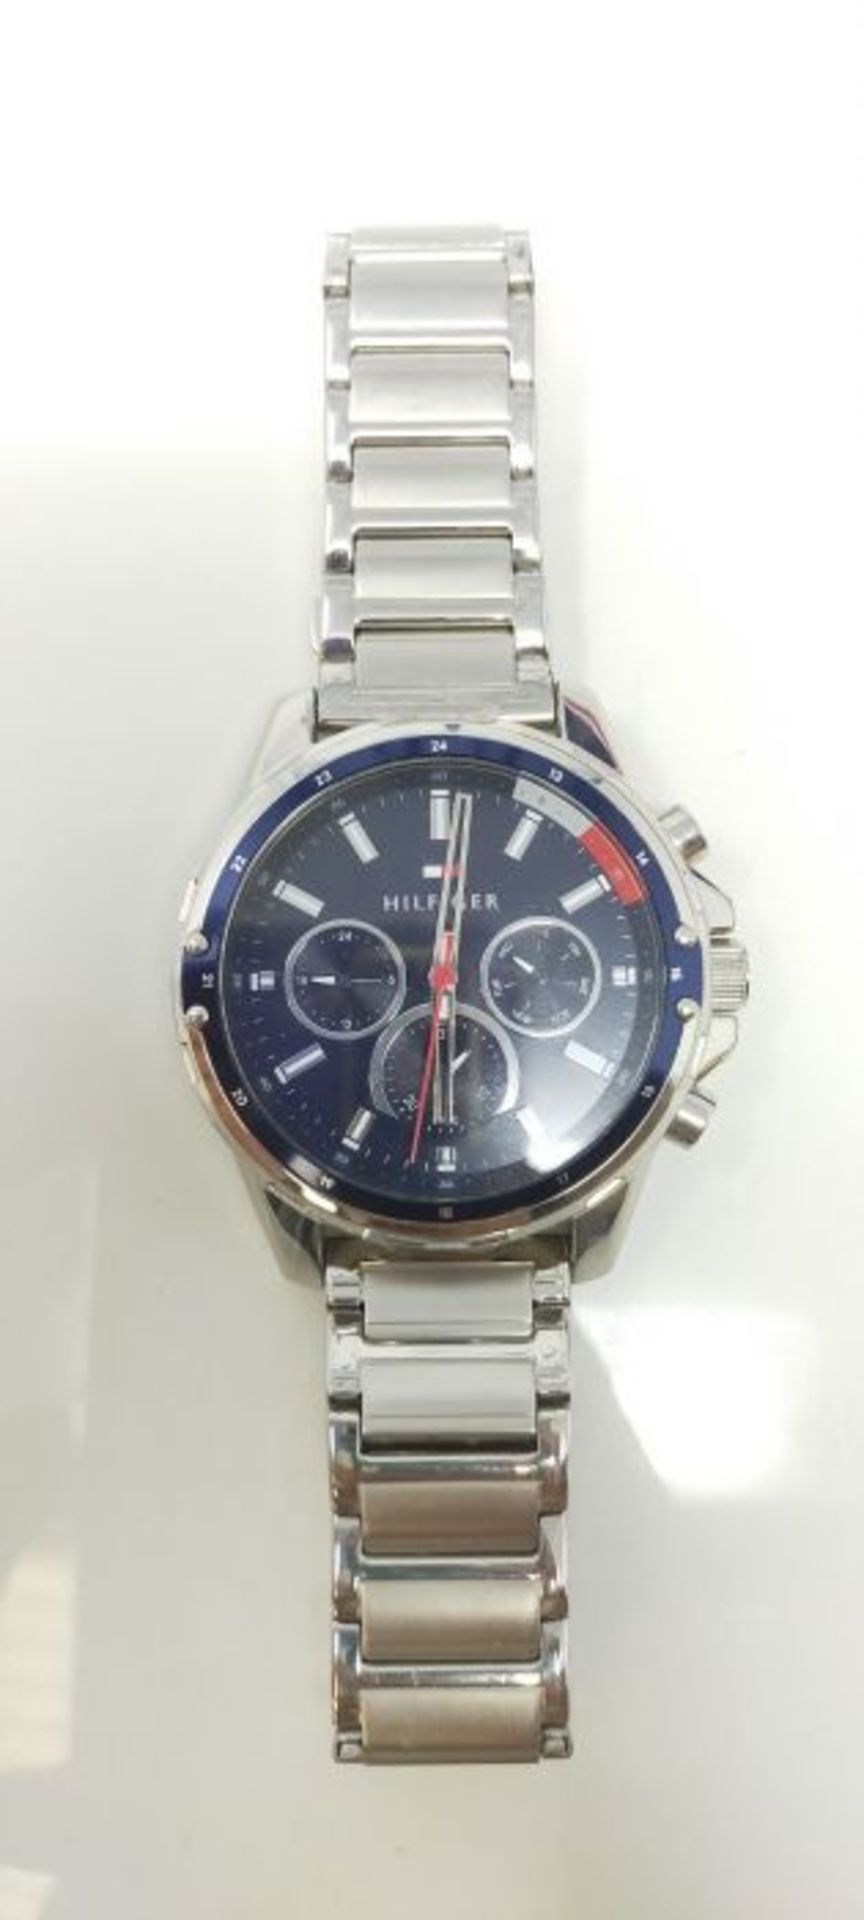 RRP £119.00 Tommy Hilfiger Men's Analogue Quartz Watch with Stainless Steel Strap 1791788 - Image 3 of 3